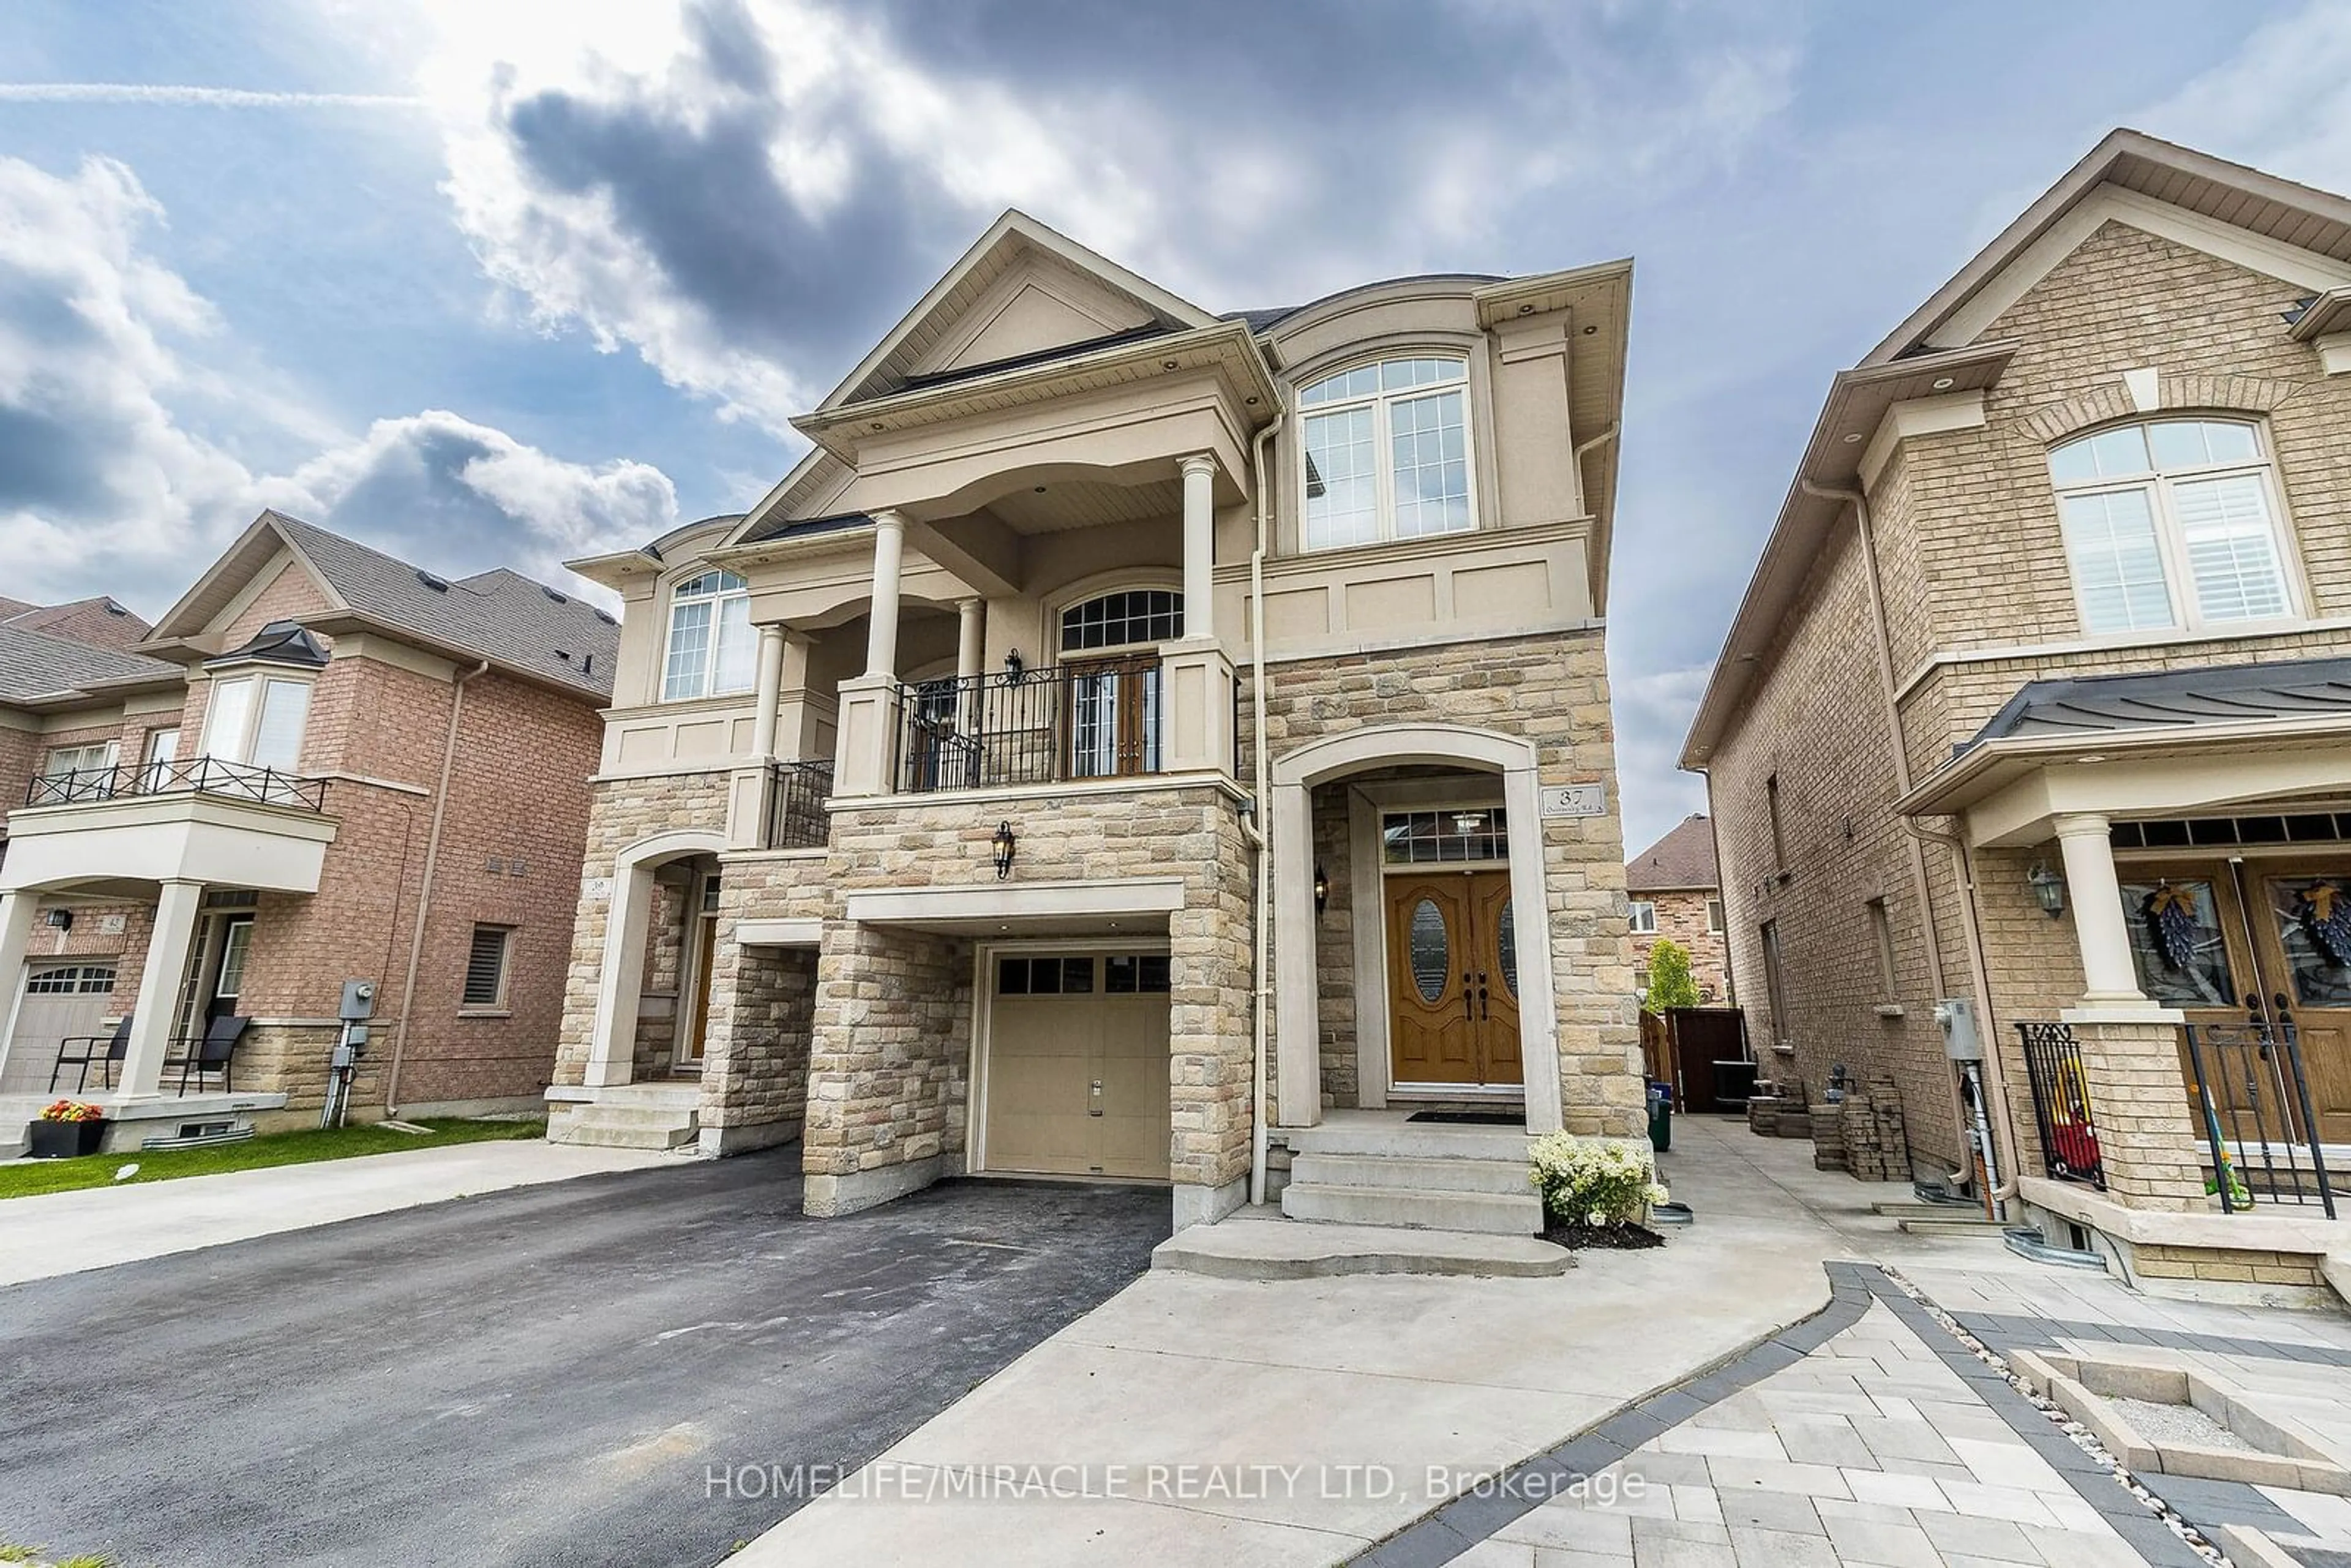 Home with brick exterior material for 37 Ostrovsky Rd, Vaughan Ontario L4H 0W5